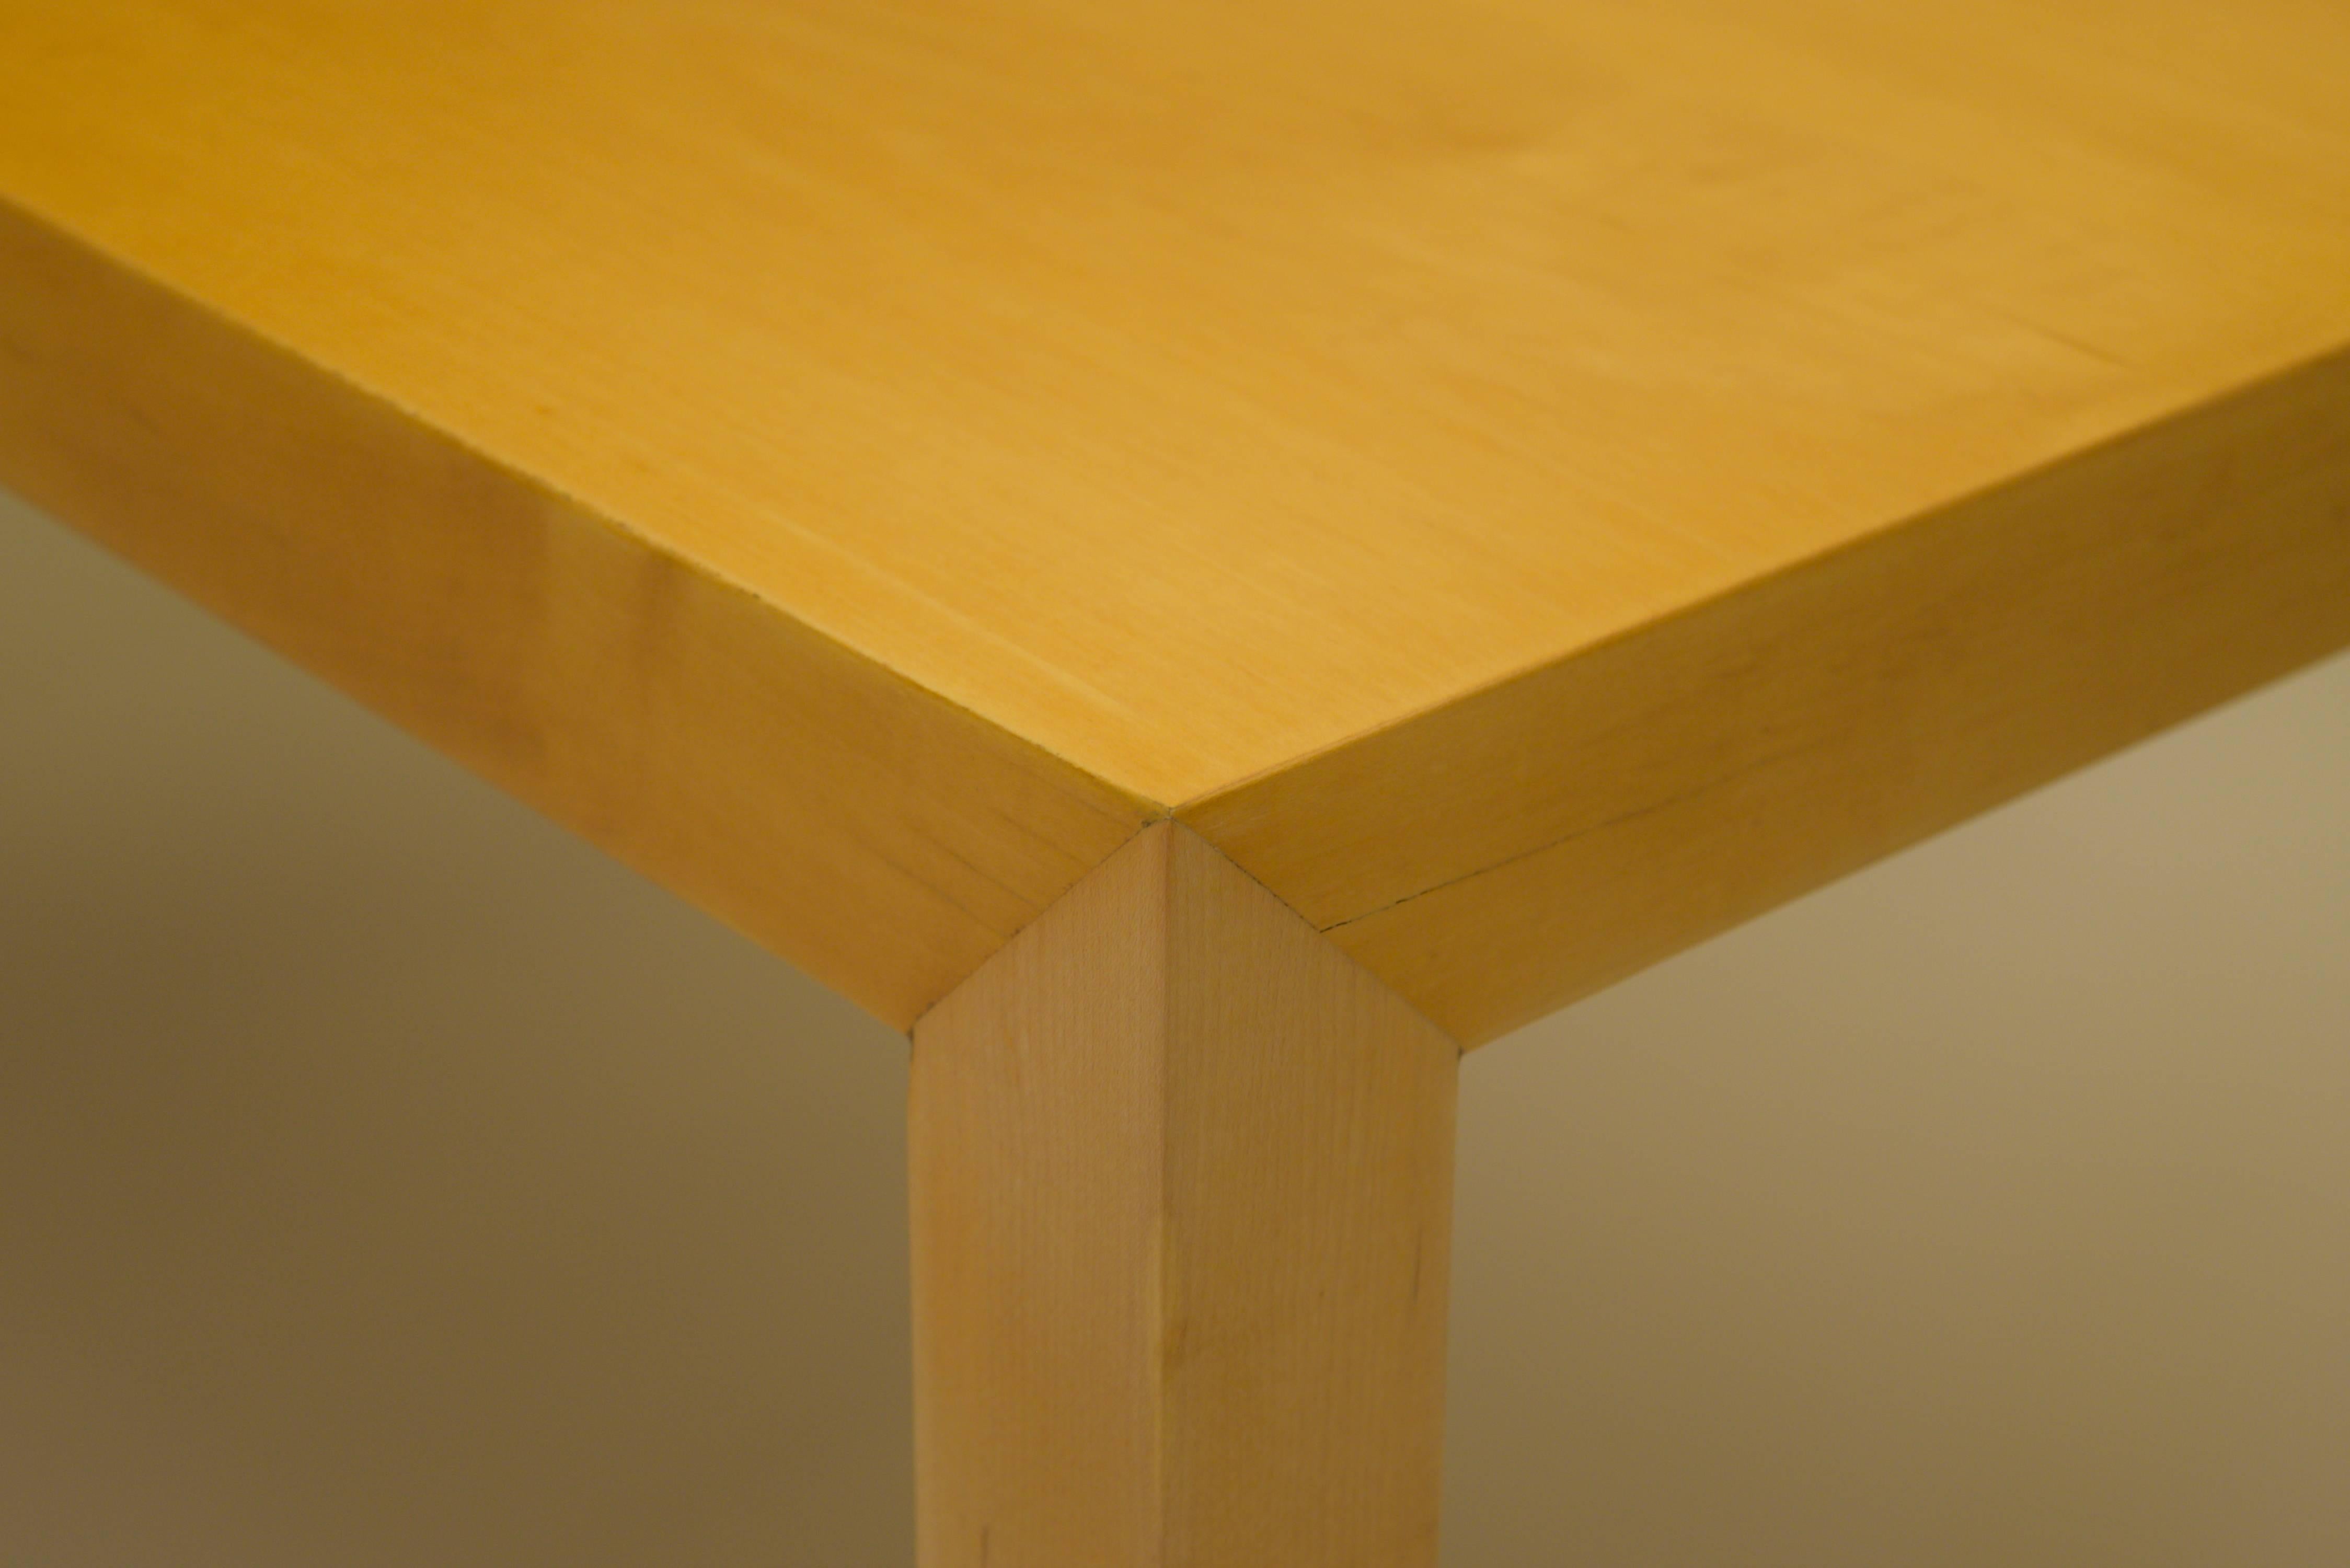 Lacquer Early Maple Dining Table by Founders